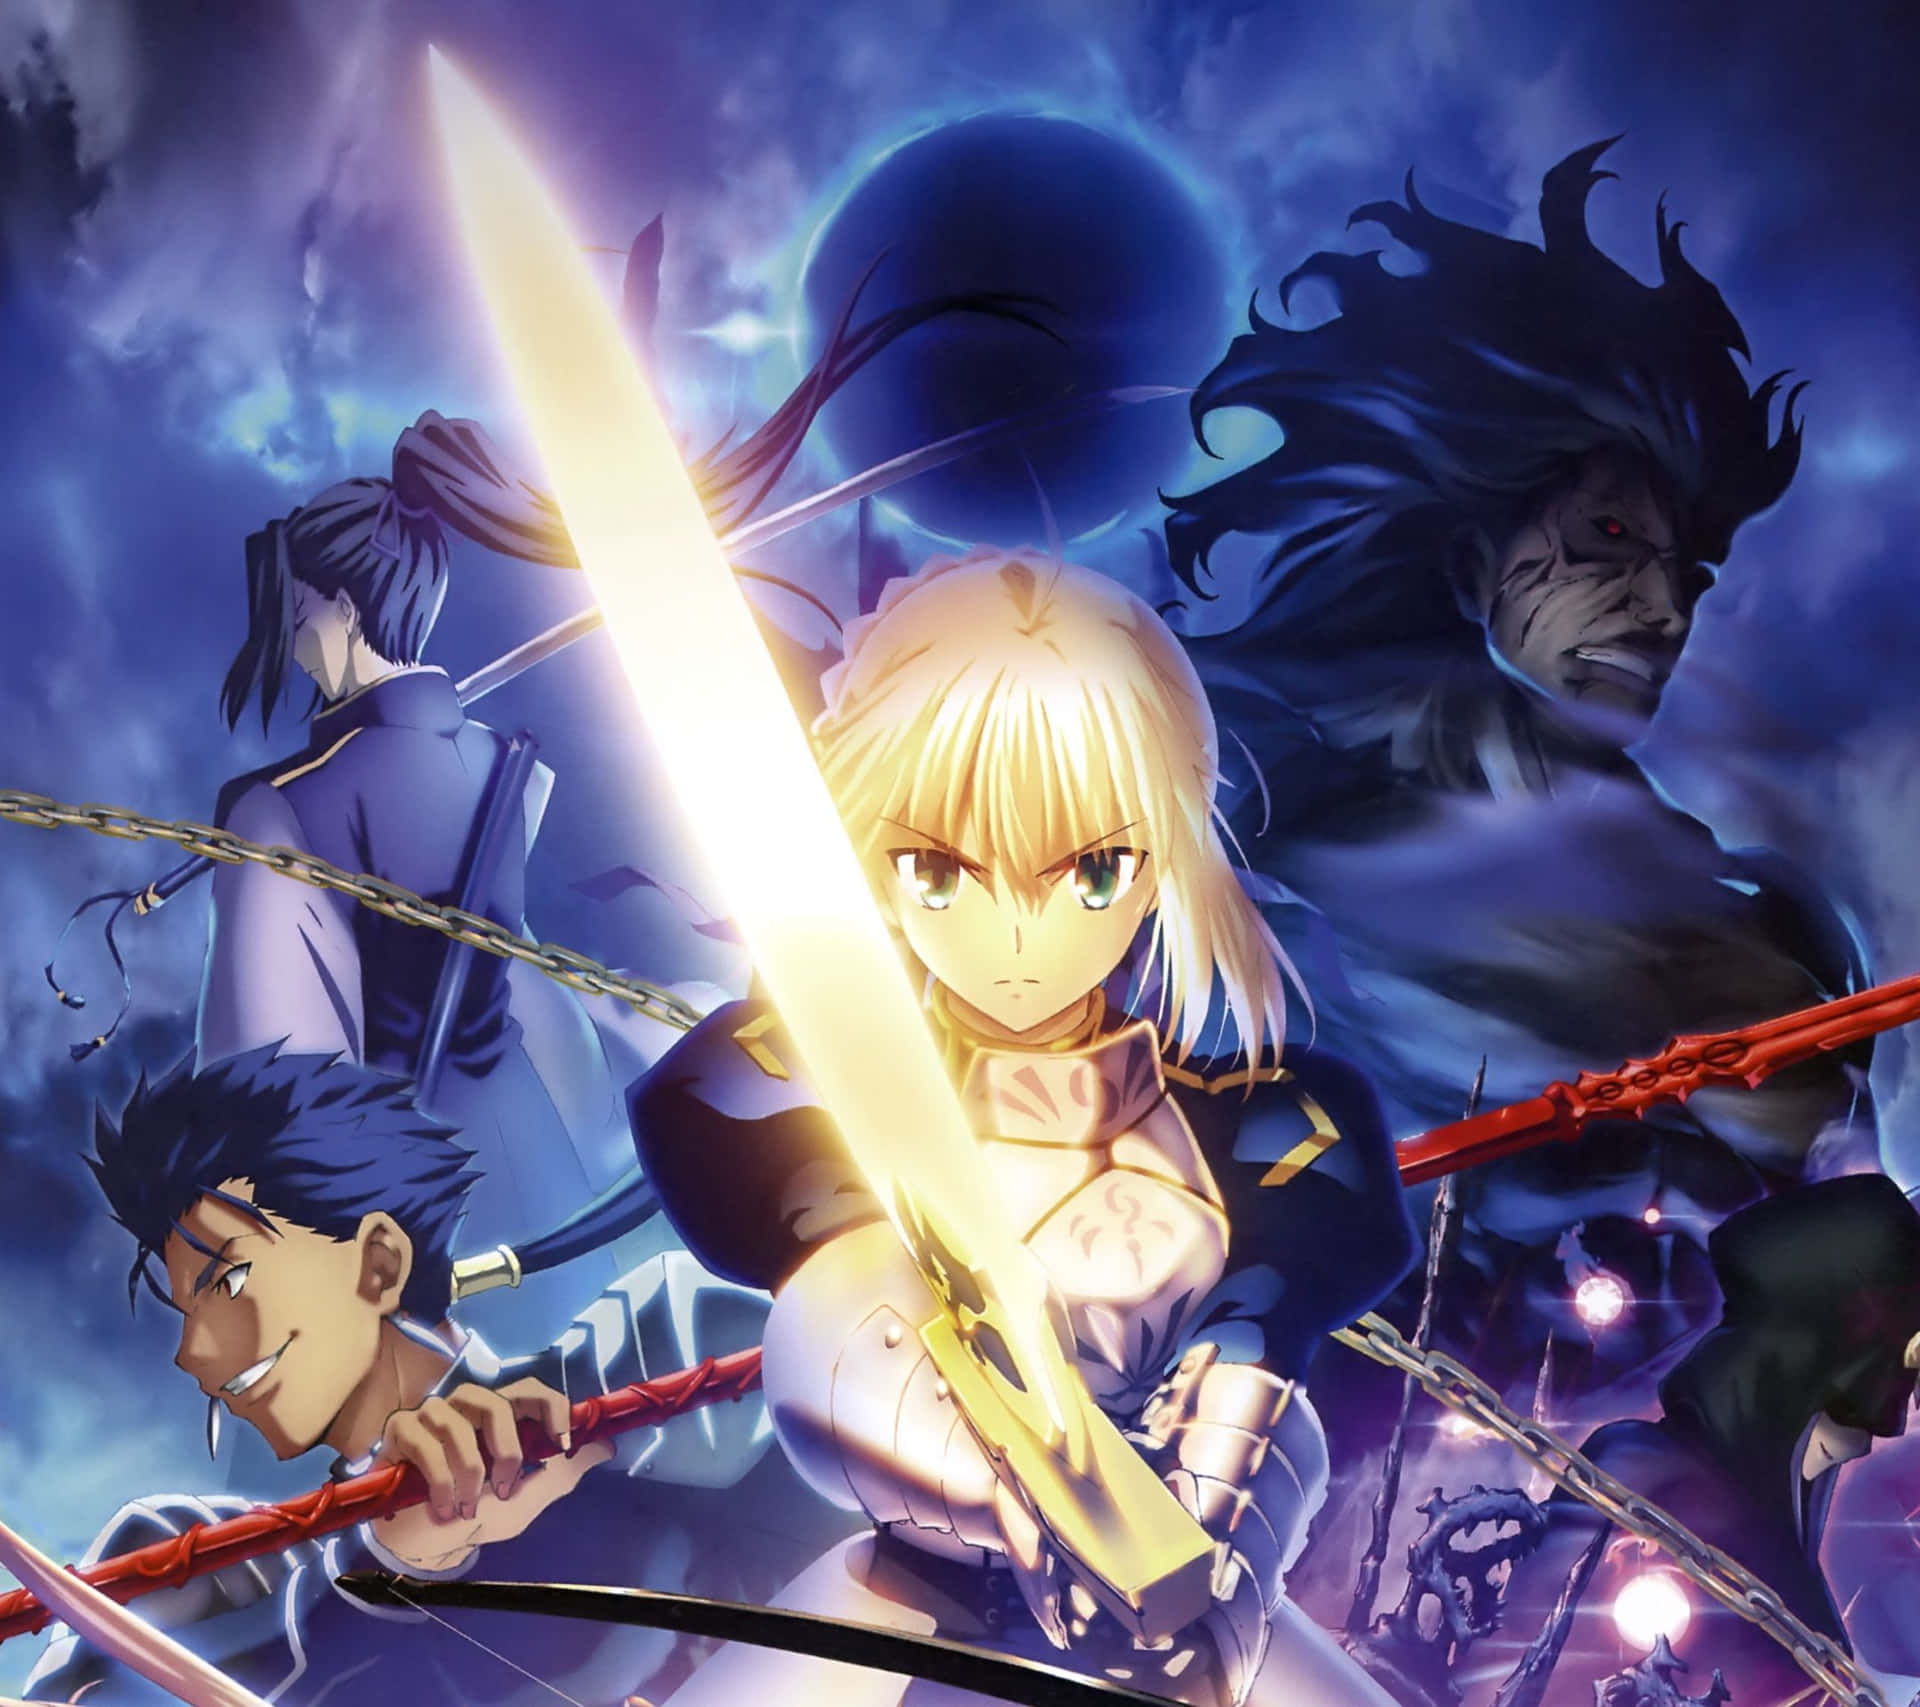 Saber Fate Stay Night With Servants Wallpaper